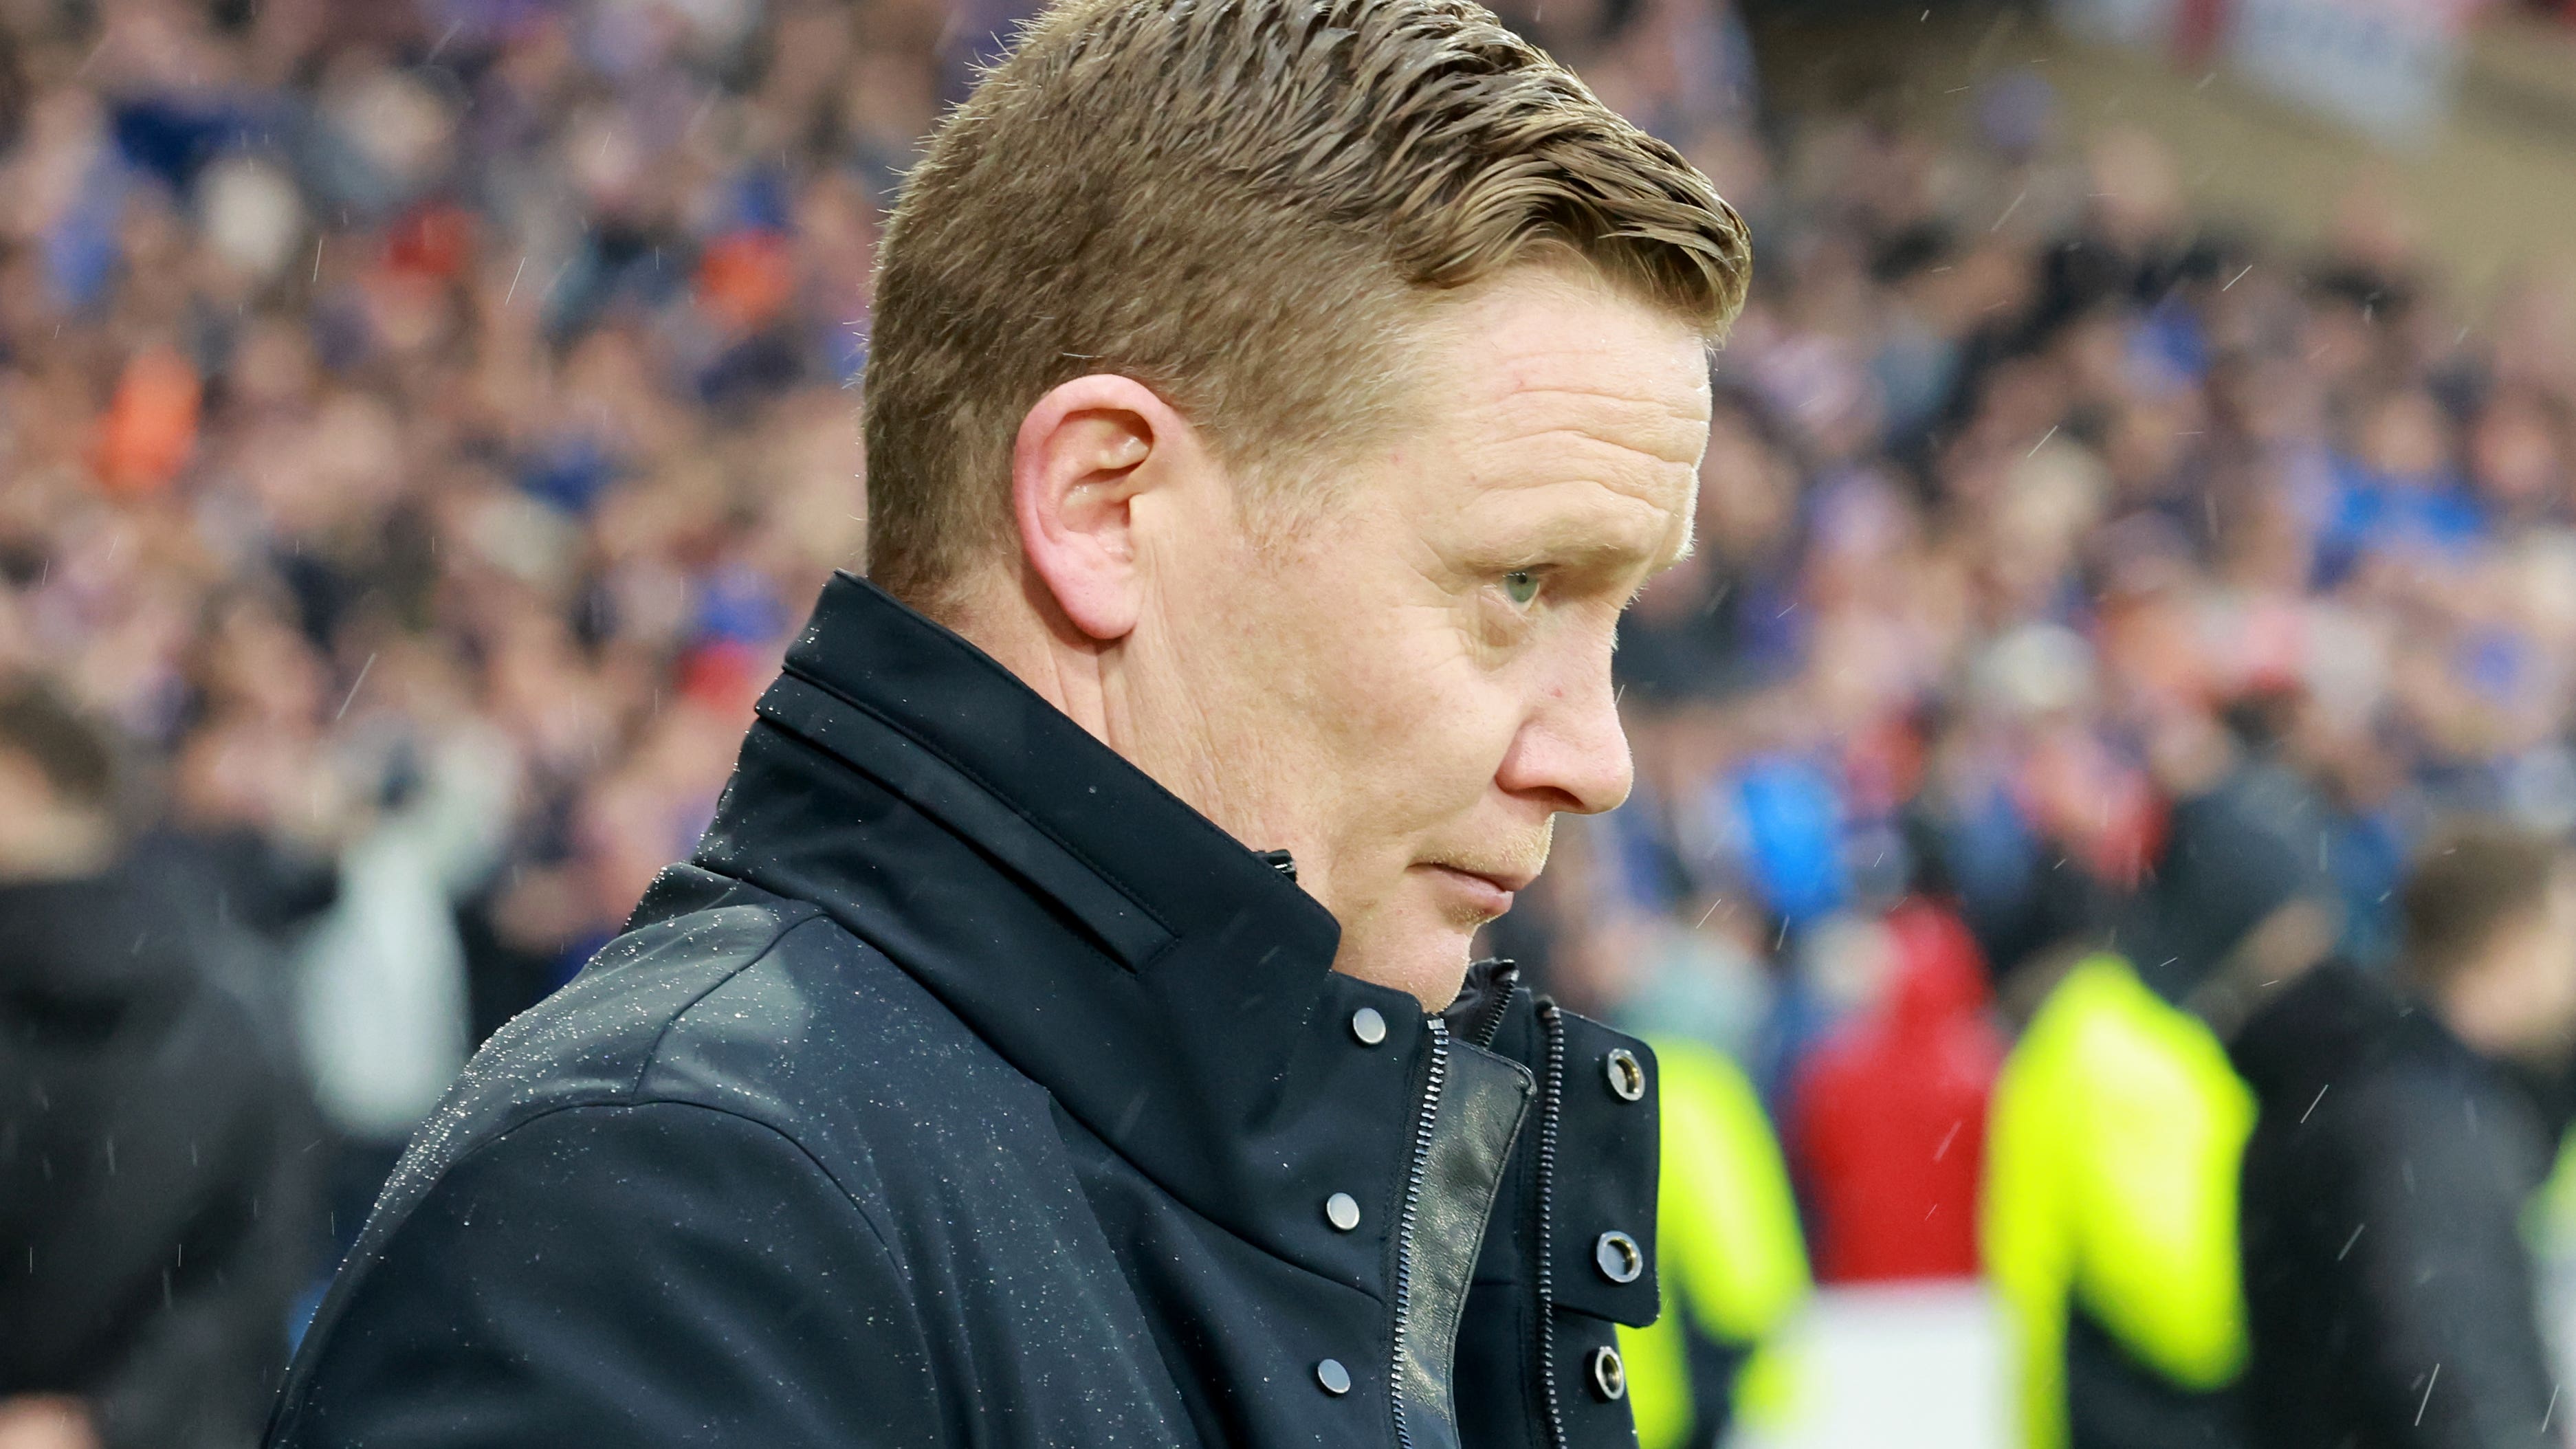 Aberdeen searching for another new manager after Barry Robson is sacked